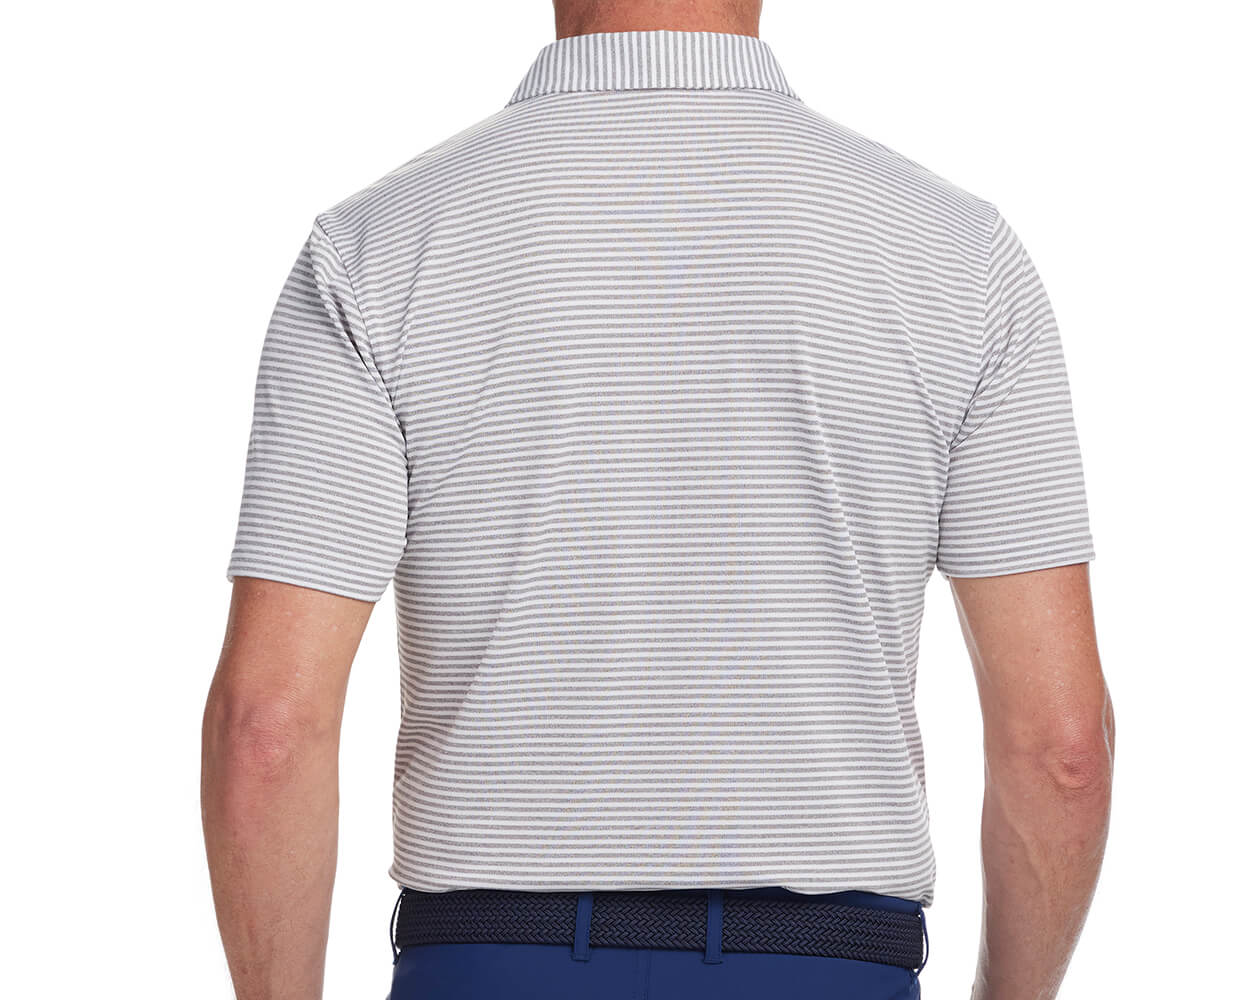 Back shot of Holderness and Bourne gray and white striped shirt modeled on man's torso.